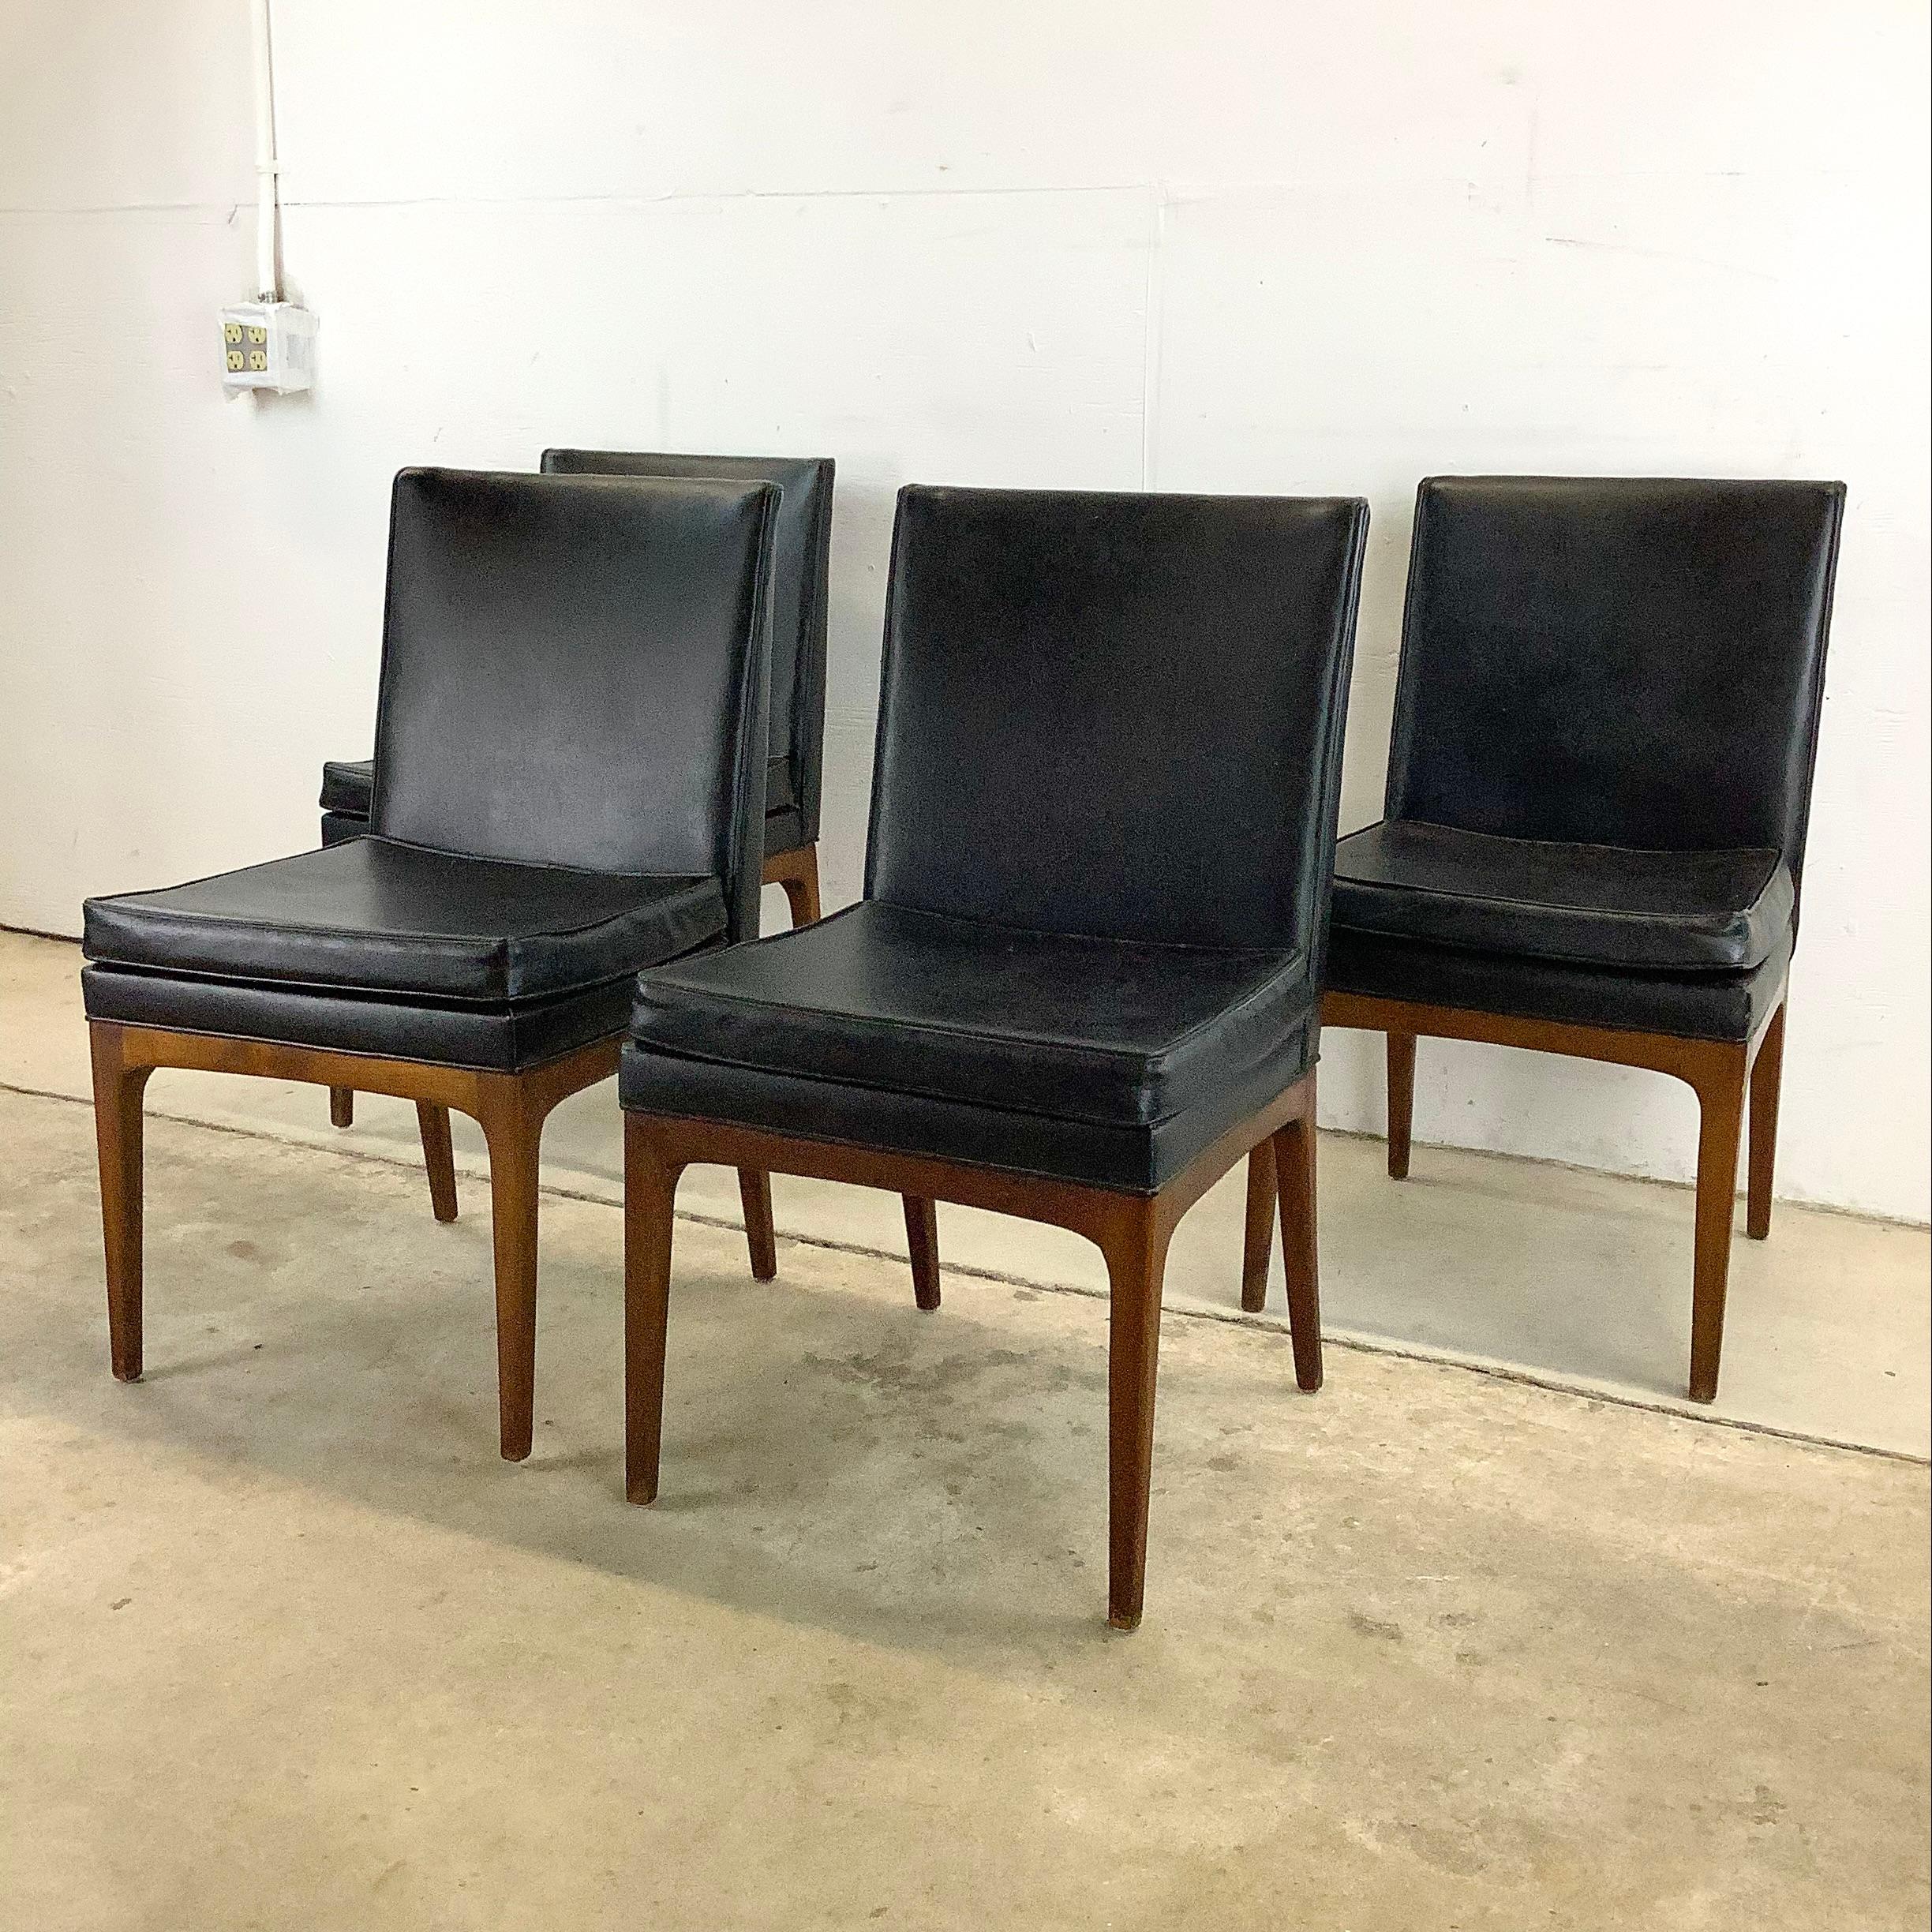 This stylish matching set of four dining chairs features durable naugahyde style upholstery, solid wood frames, and shapely mid-century modern style design. Comfortable set of mid-height seat back dining chairs make the perfect mcm seating option